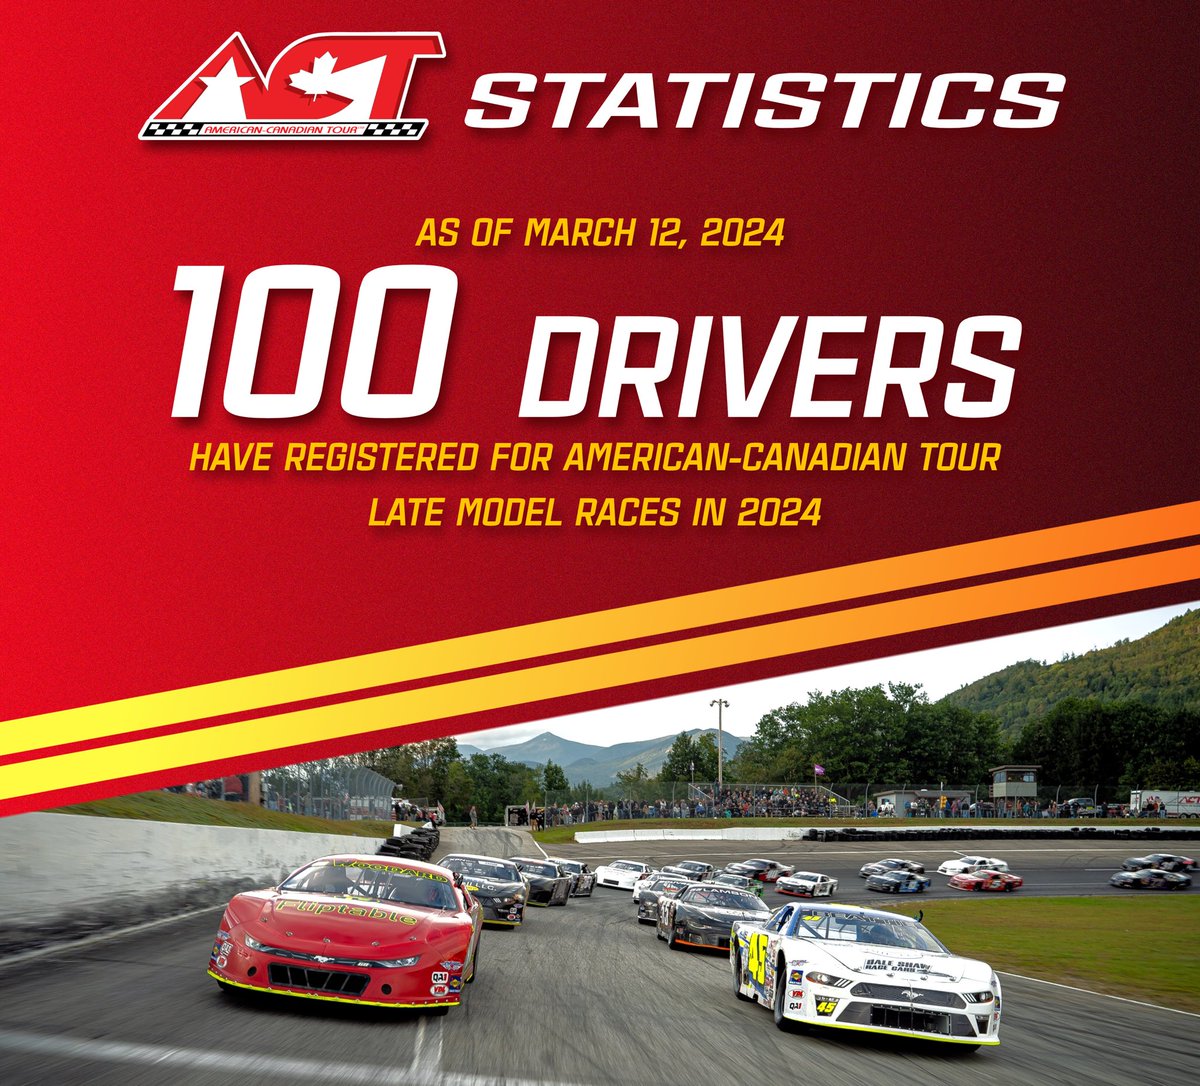 As of today, the American-Canadian Tour office has received registrations and/or licenses for 100 different Late Model drivers. We are proud to have a registrations from each and every state in New England as well as many from our friends in Canada. In 2023, the